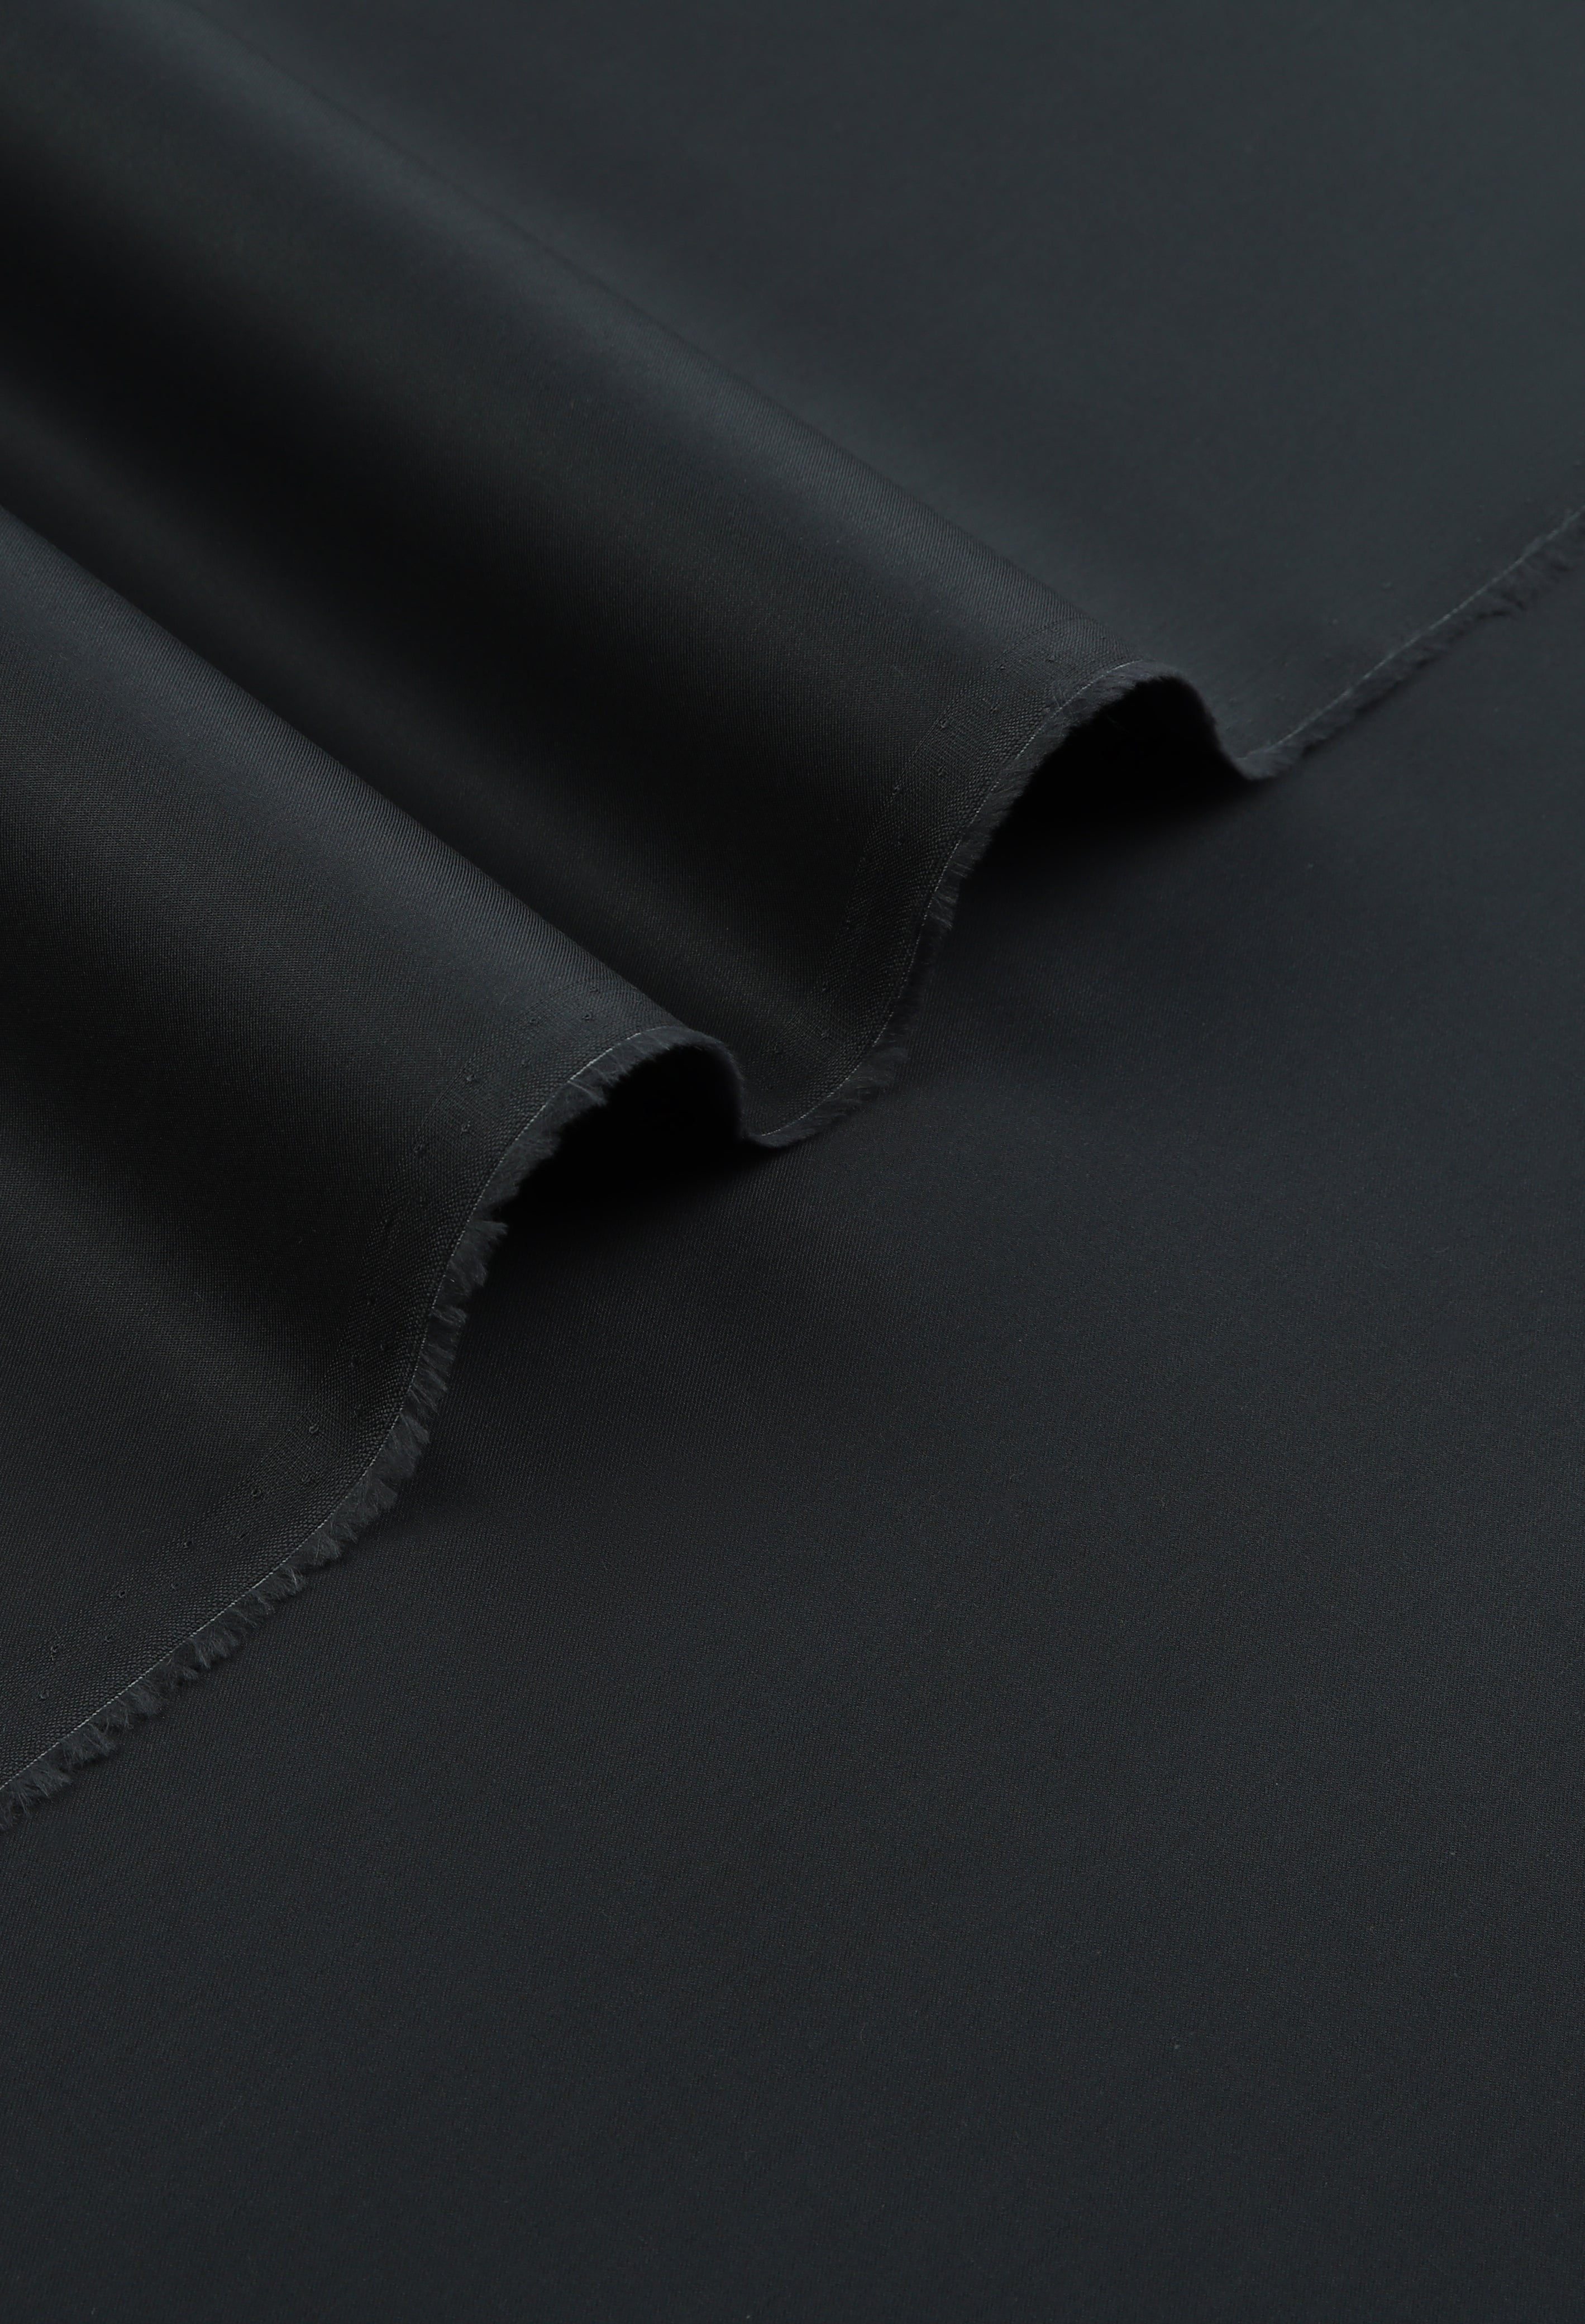 Charcoal Grey Cotton Fabric (BS-001696)